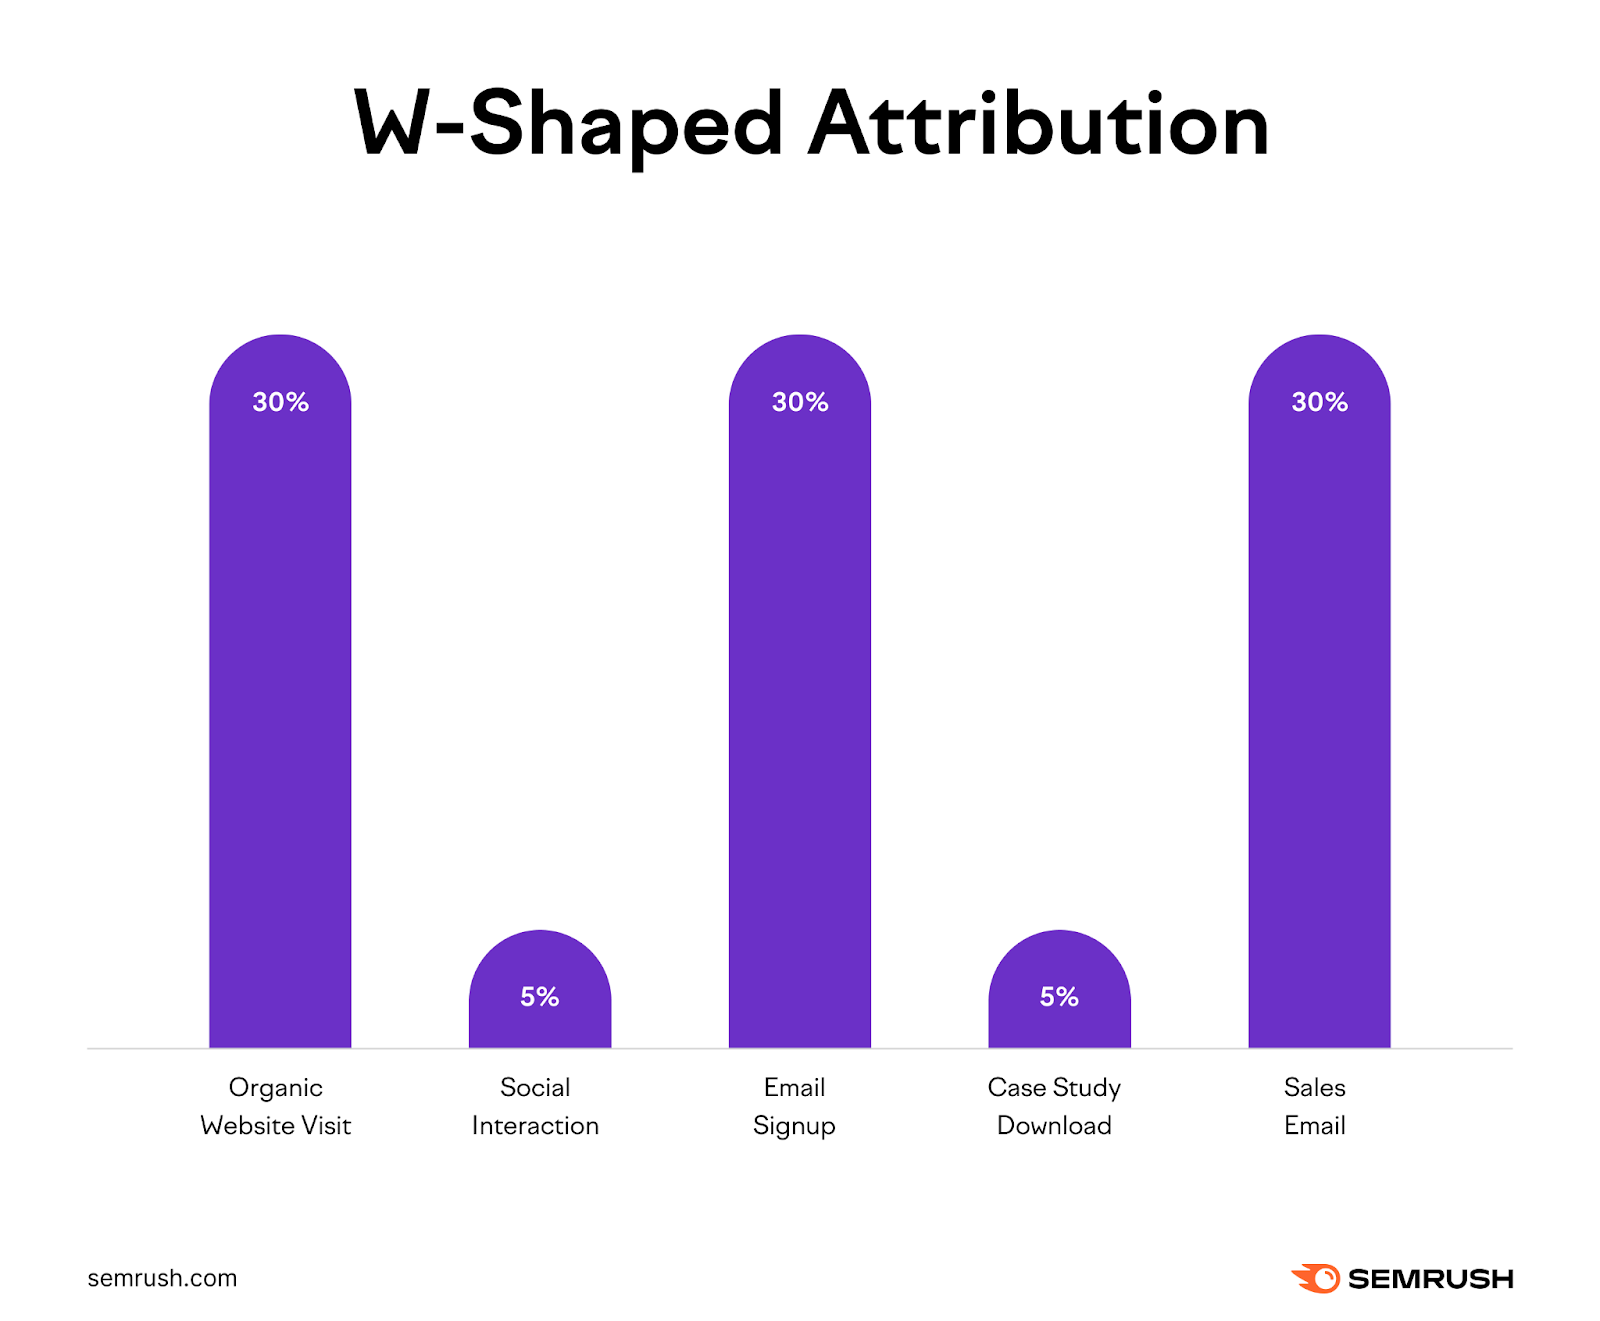 W-shaped attribution assigns 30% of the credit to the first, middle, and last touchpoints, with the remaining credit spread across the other touchpoints.